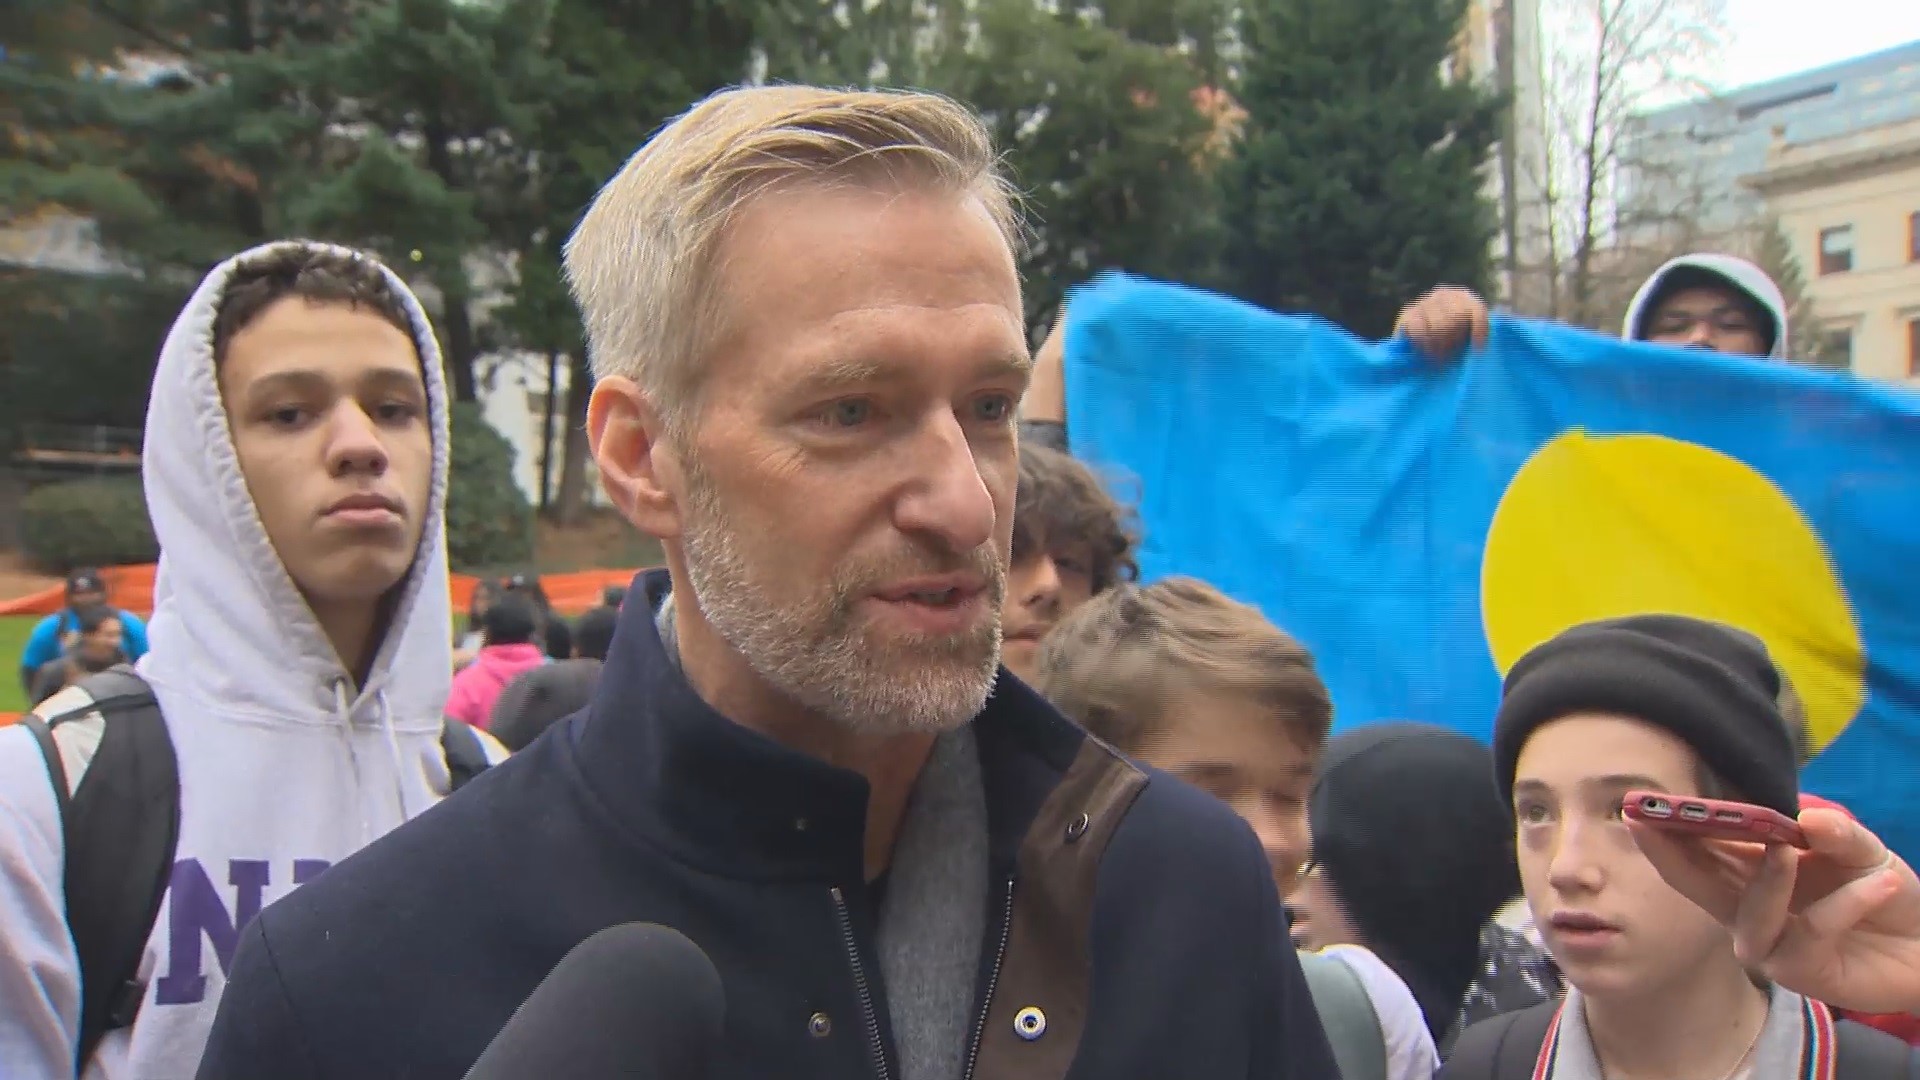 Portland Mayor Ted Wheeler reacts to students' demands during the Global Climate Strike on December 6, 2019.  Wheeler said he embraces the urgency for climate action